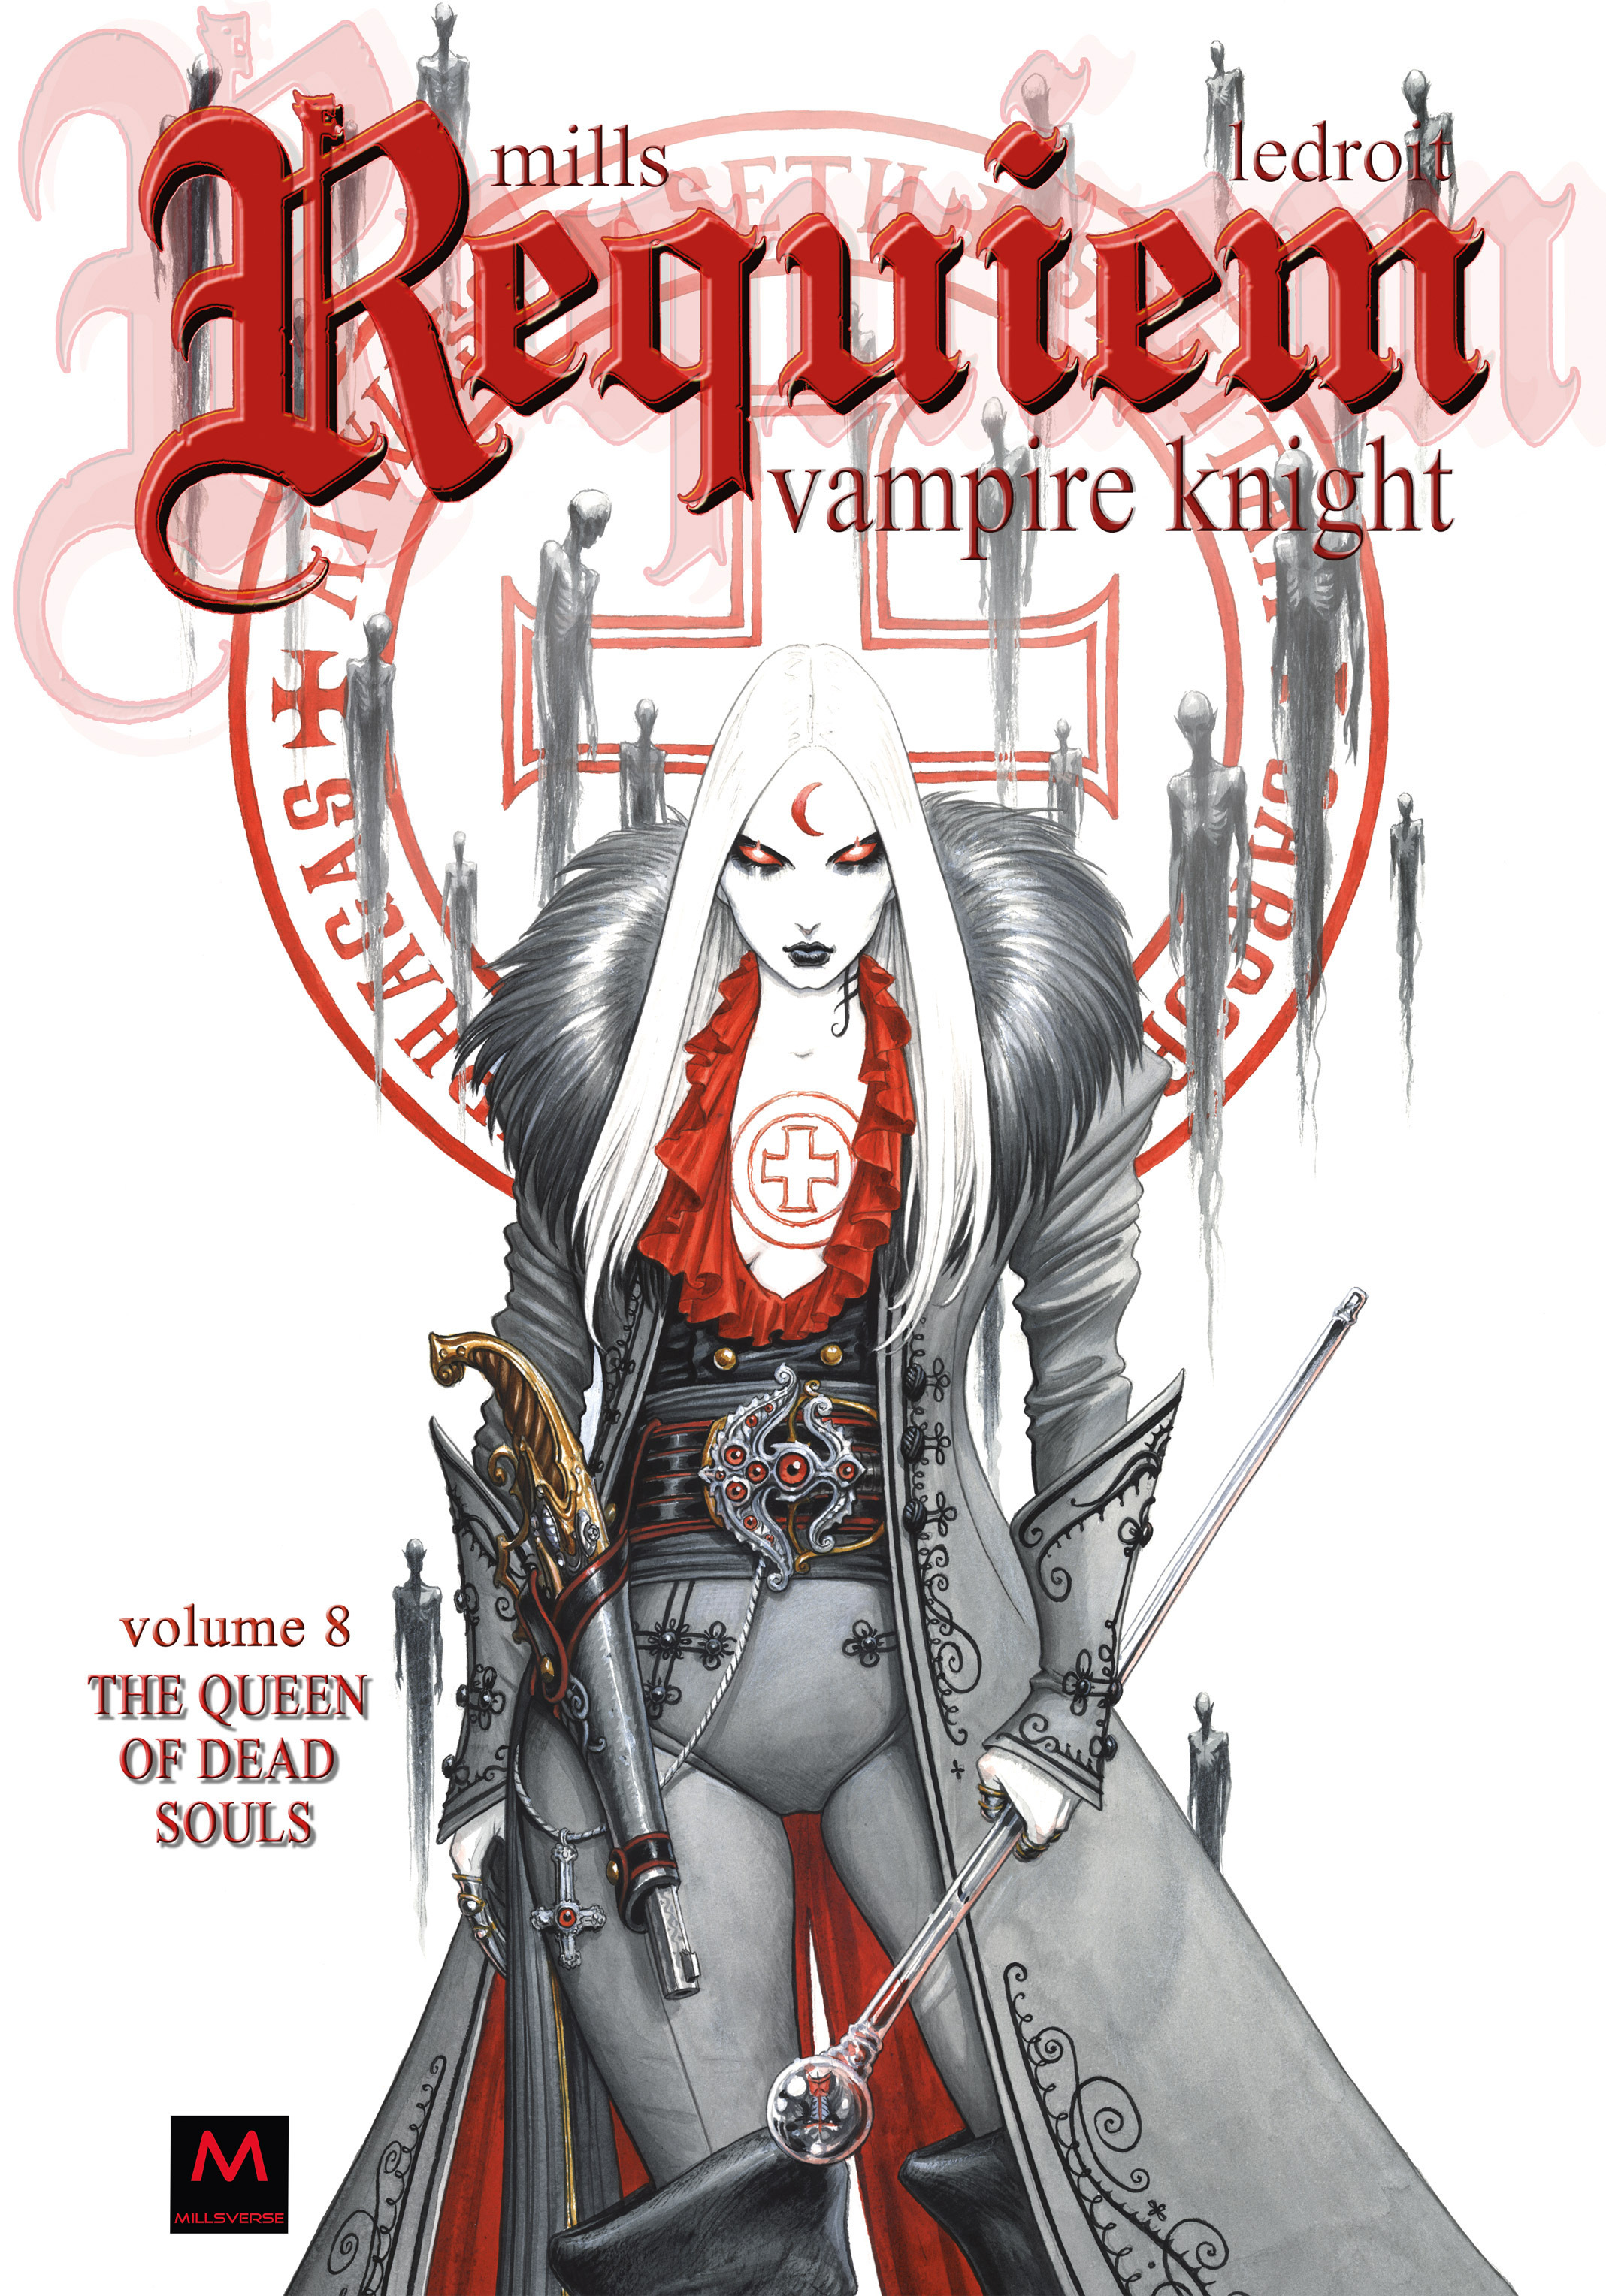 Requiem Vampire Knight Issue 8 | Read Requiem Vampire Knight Issue 8 comic  online in high quality. Read Full Comic online for free - Read comics  online in high quality .